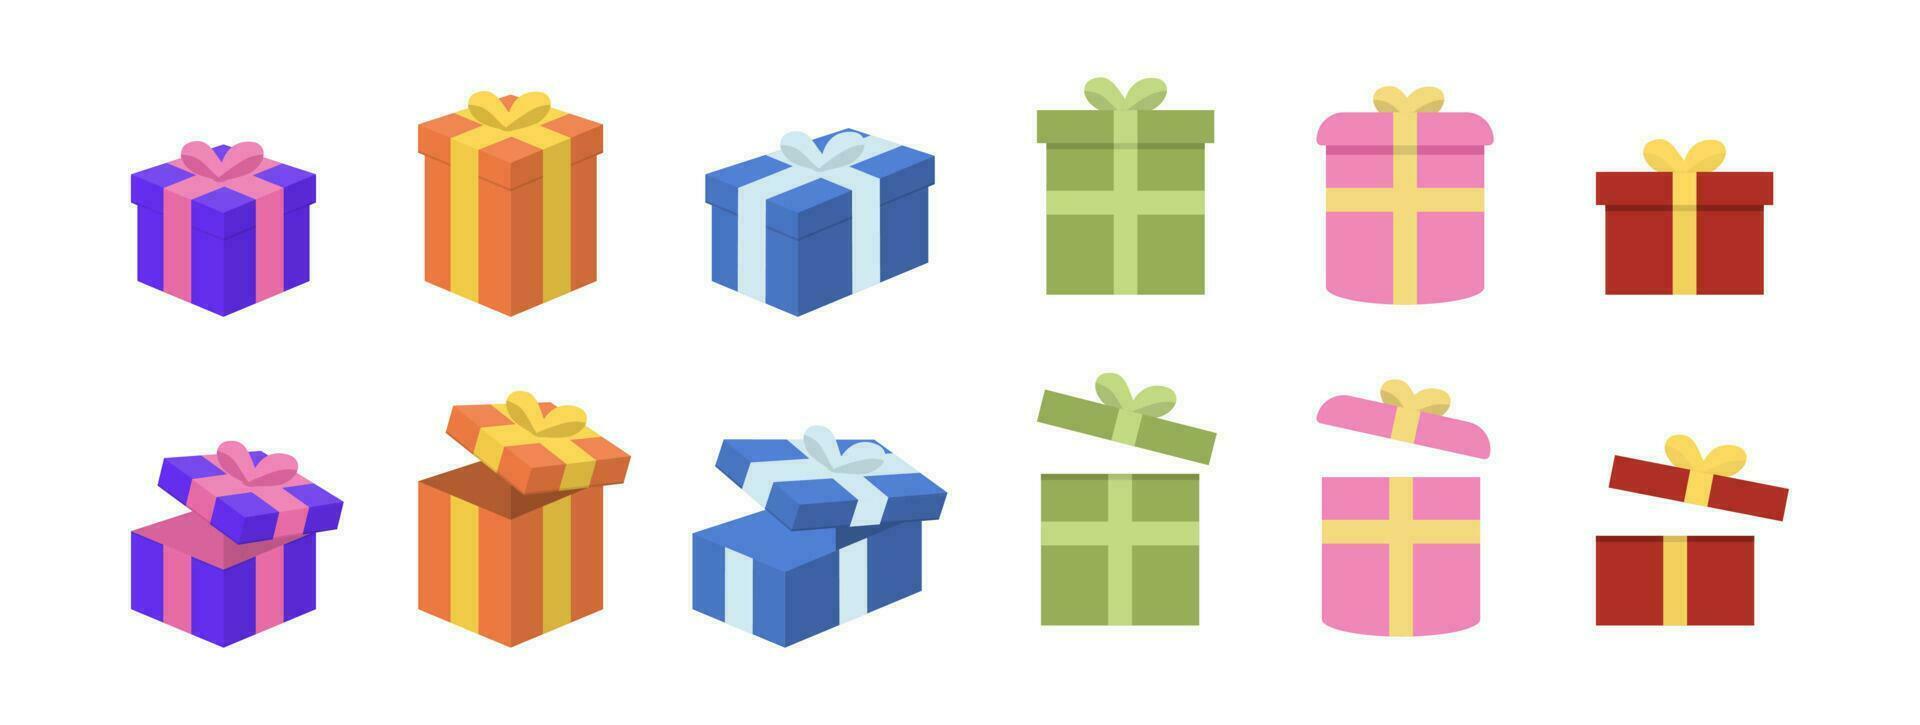 Present box collection. Gift box icon set. Closed and open gift box collection. Birthday package icon. vector